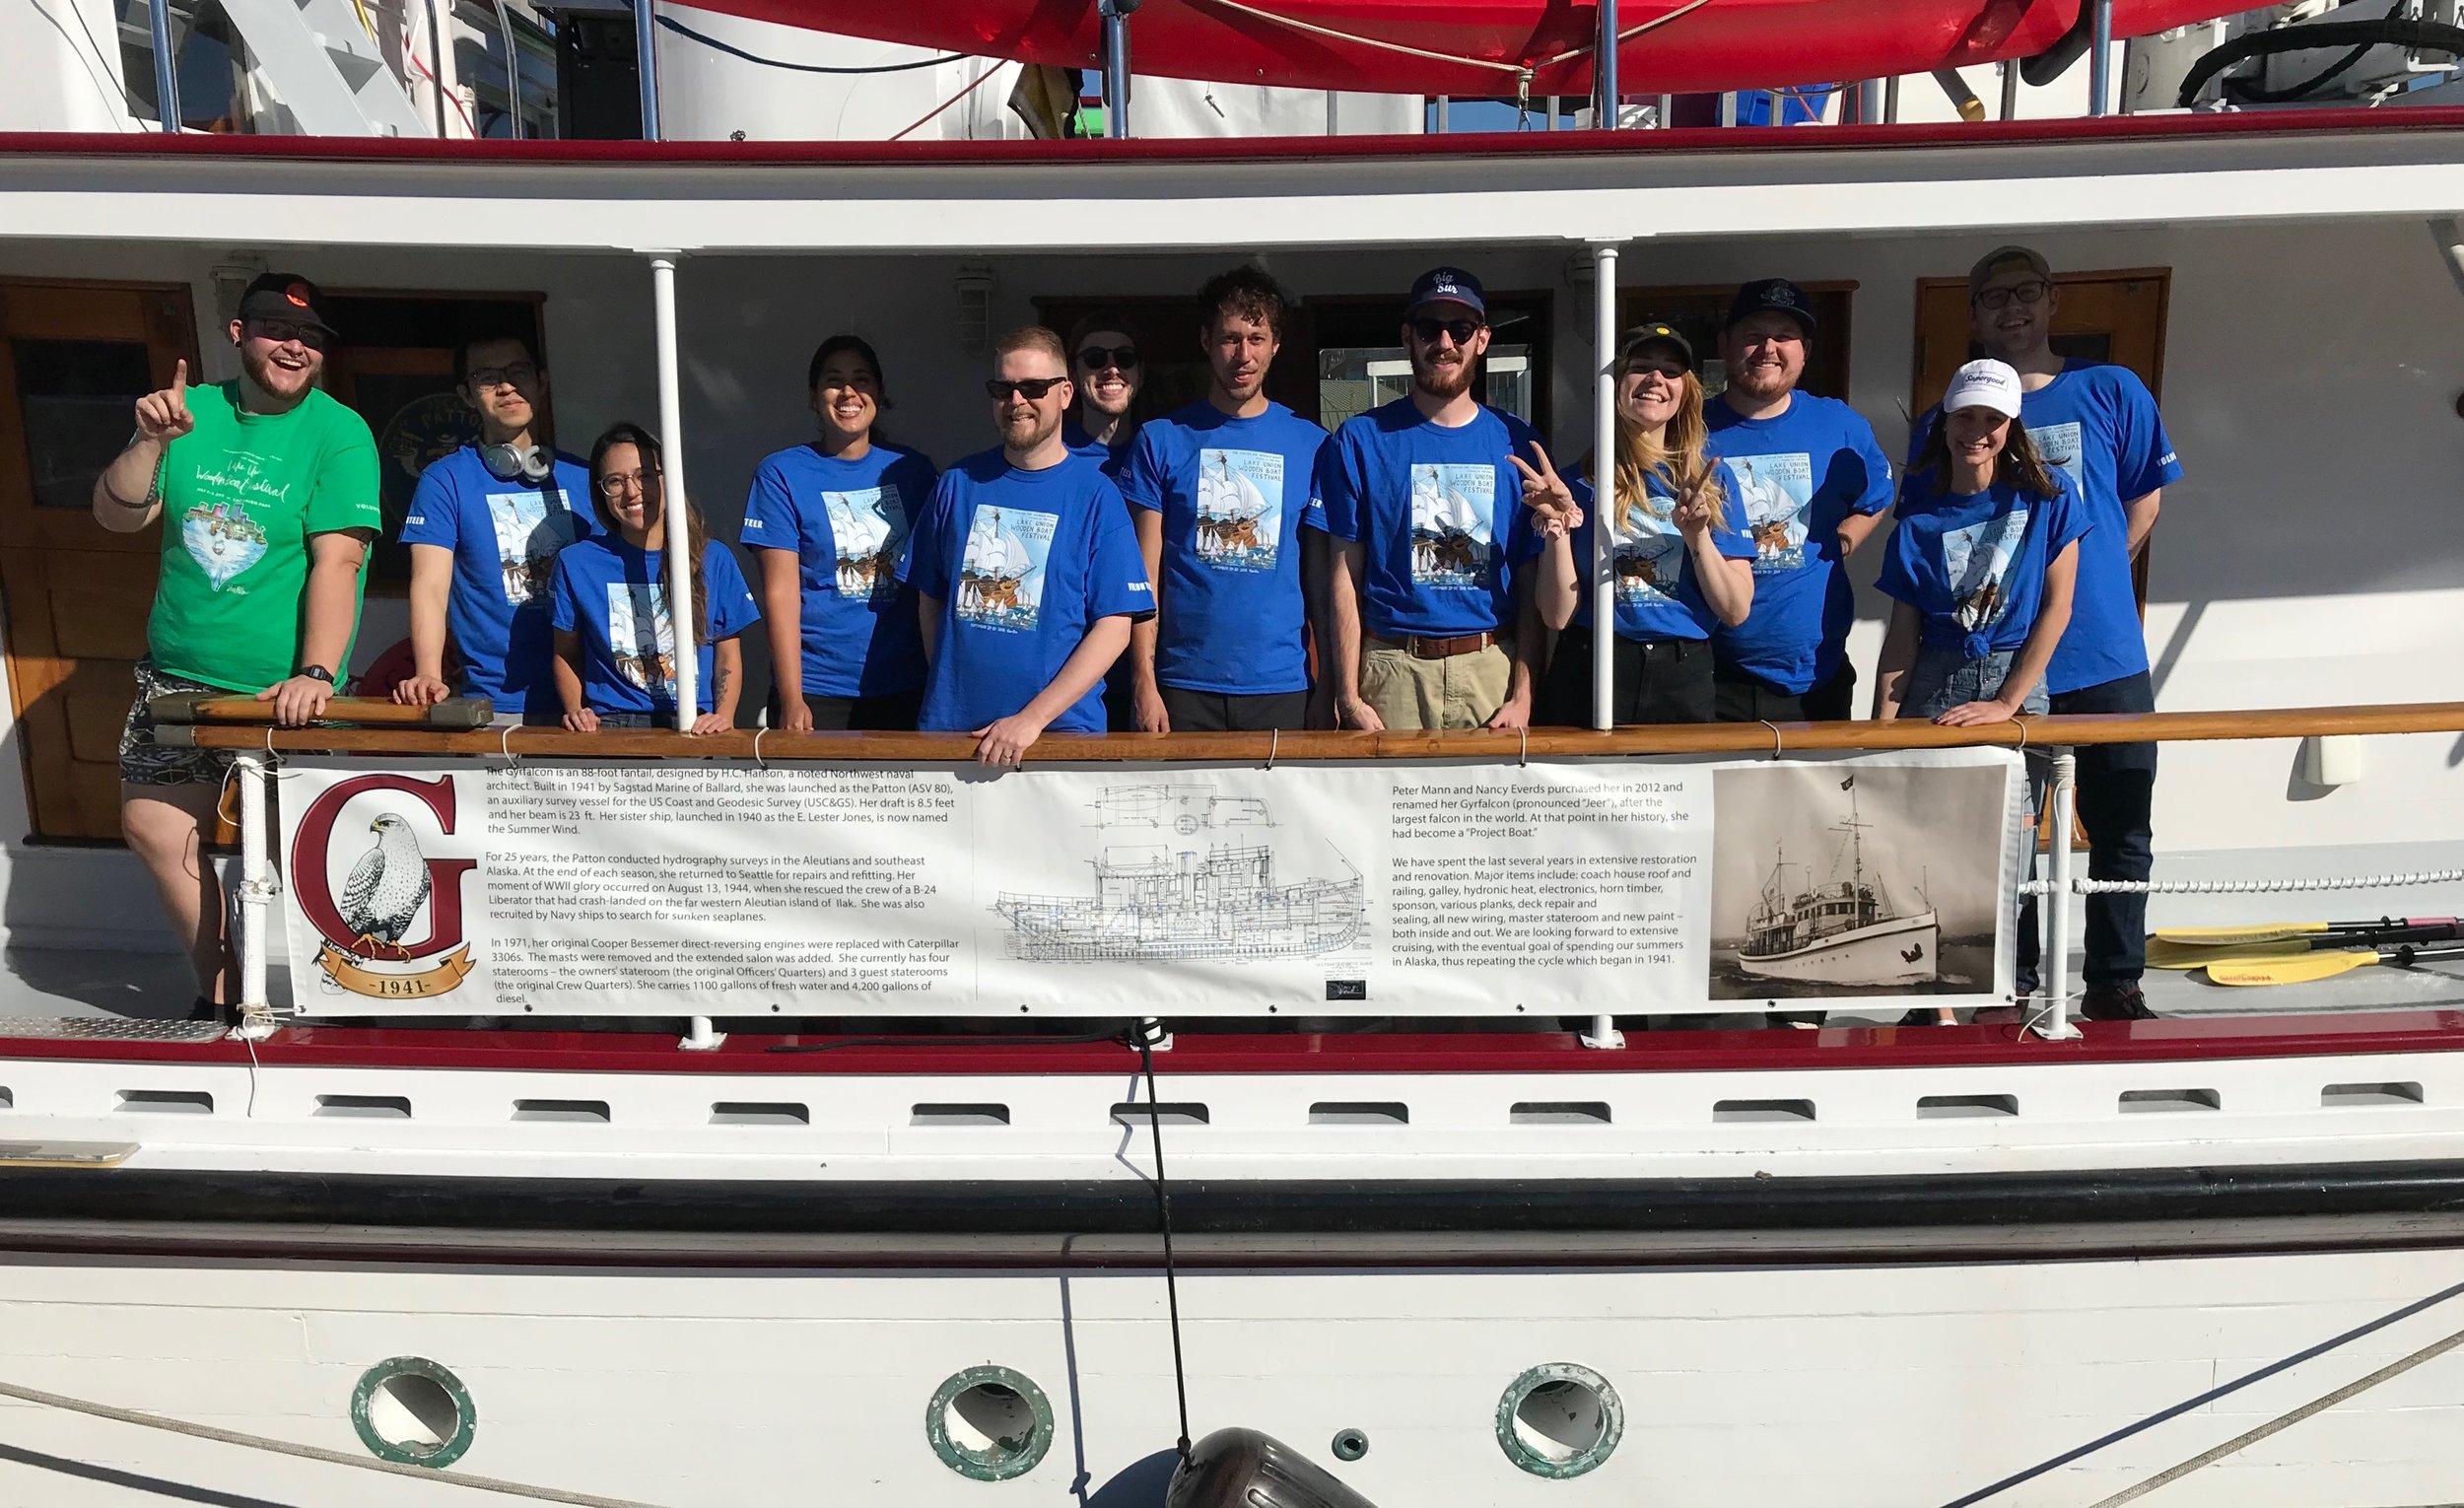 Volunteers gathered on the deck of a large wooden ship during the Wooden Boat Festival